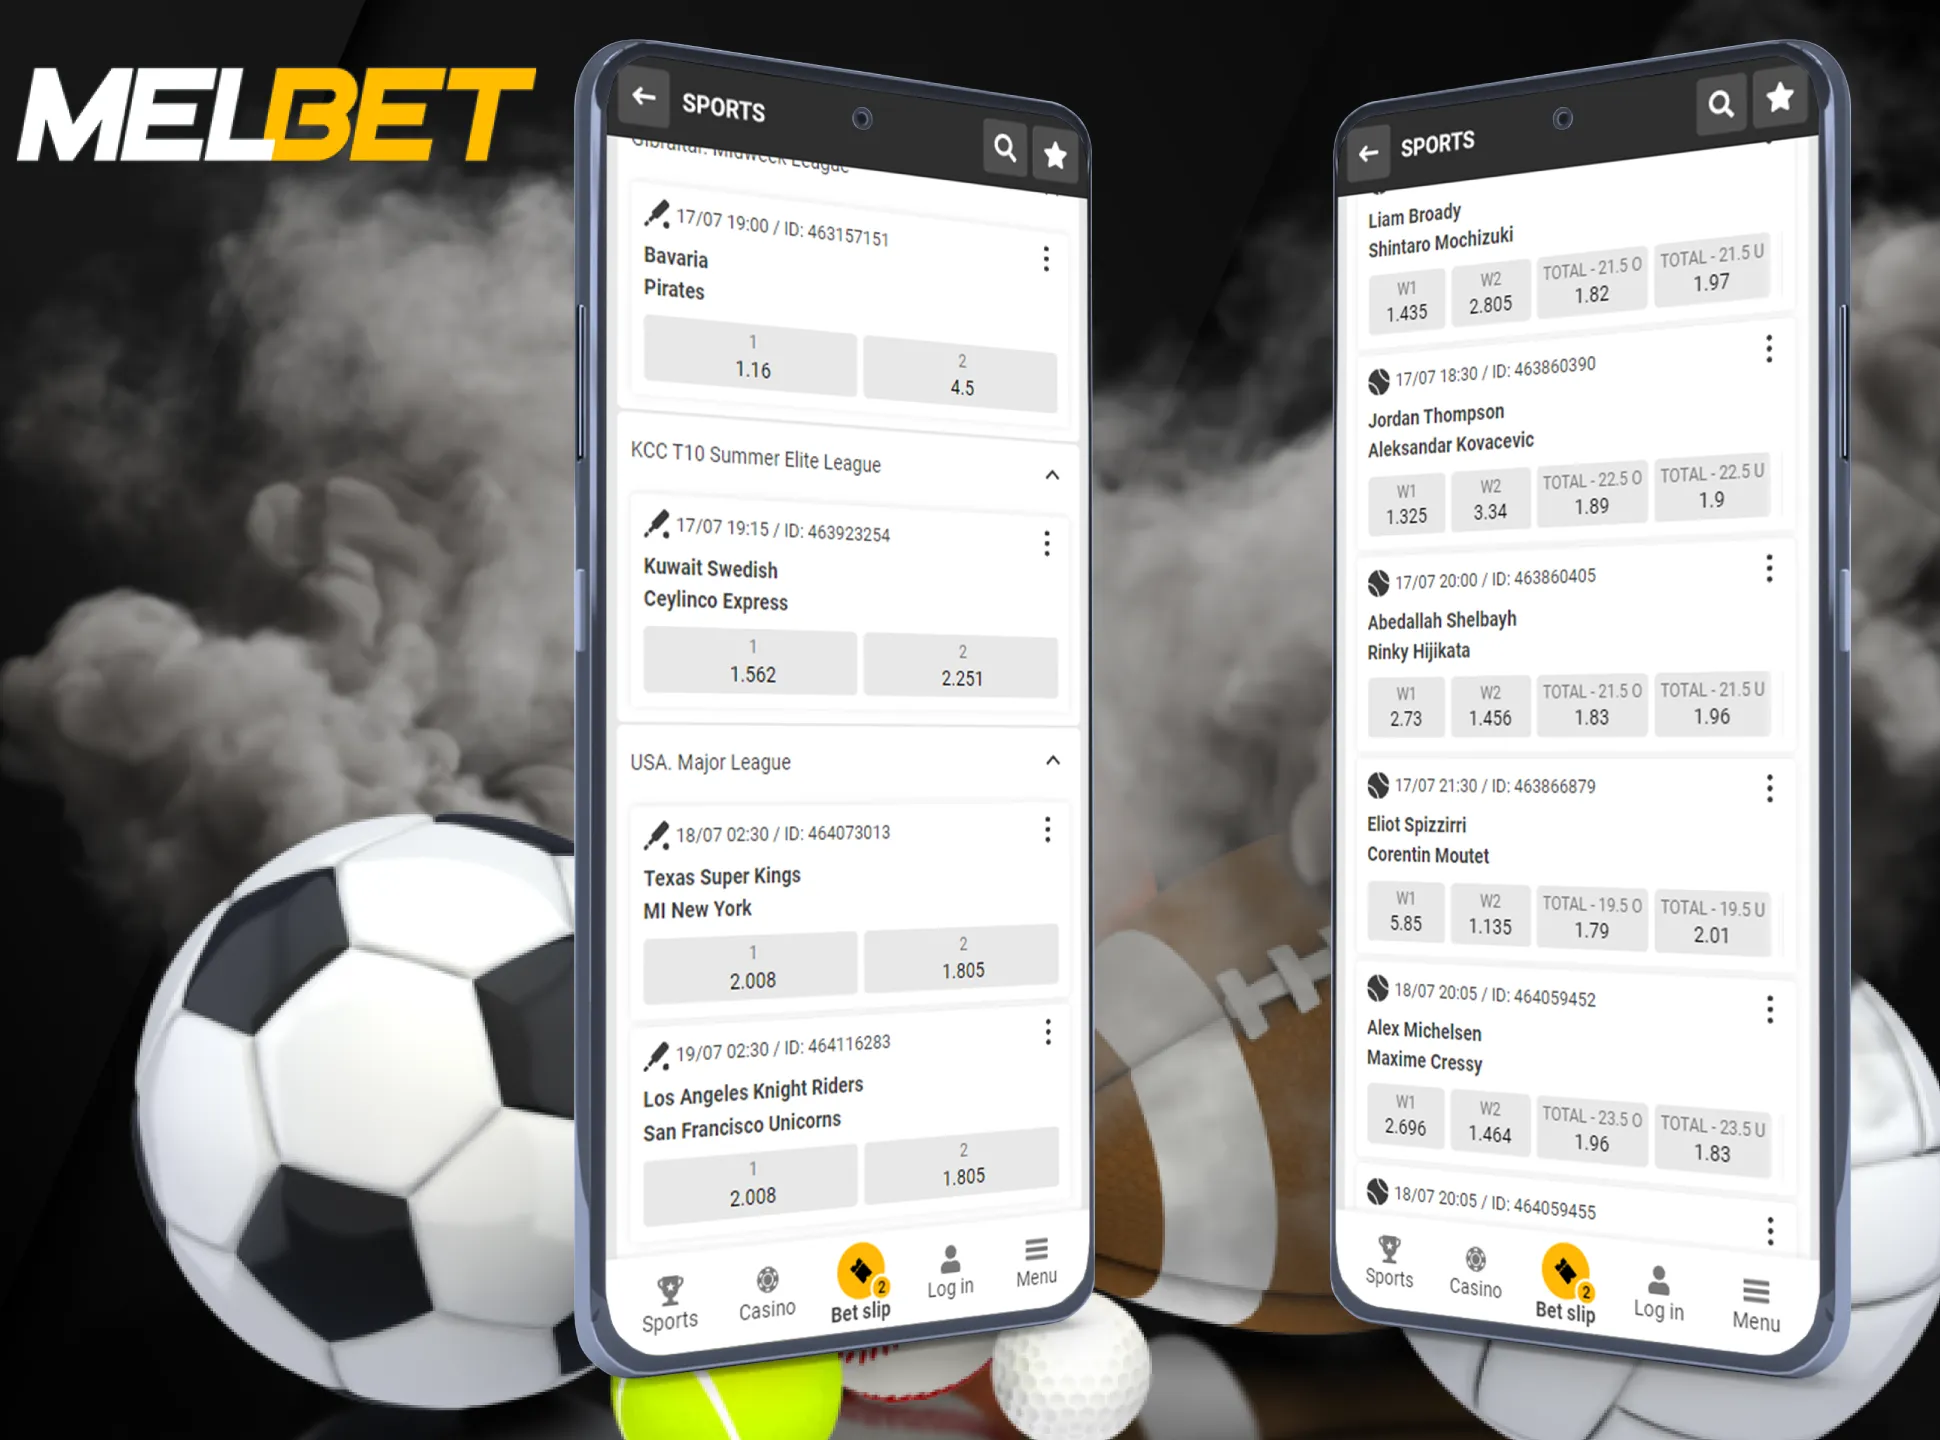 Melbet offers various options of betting on sports.